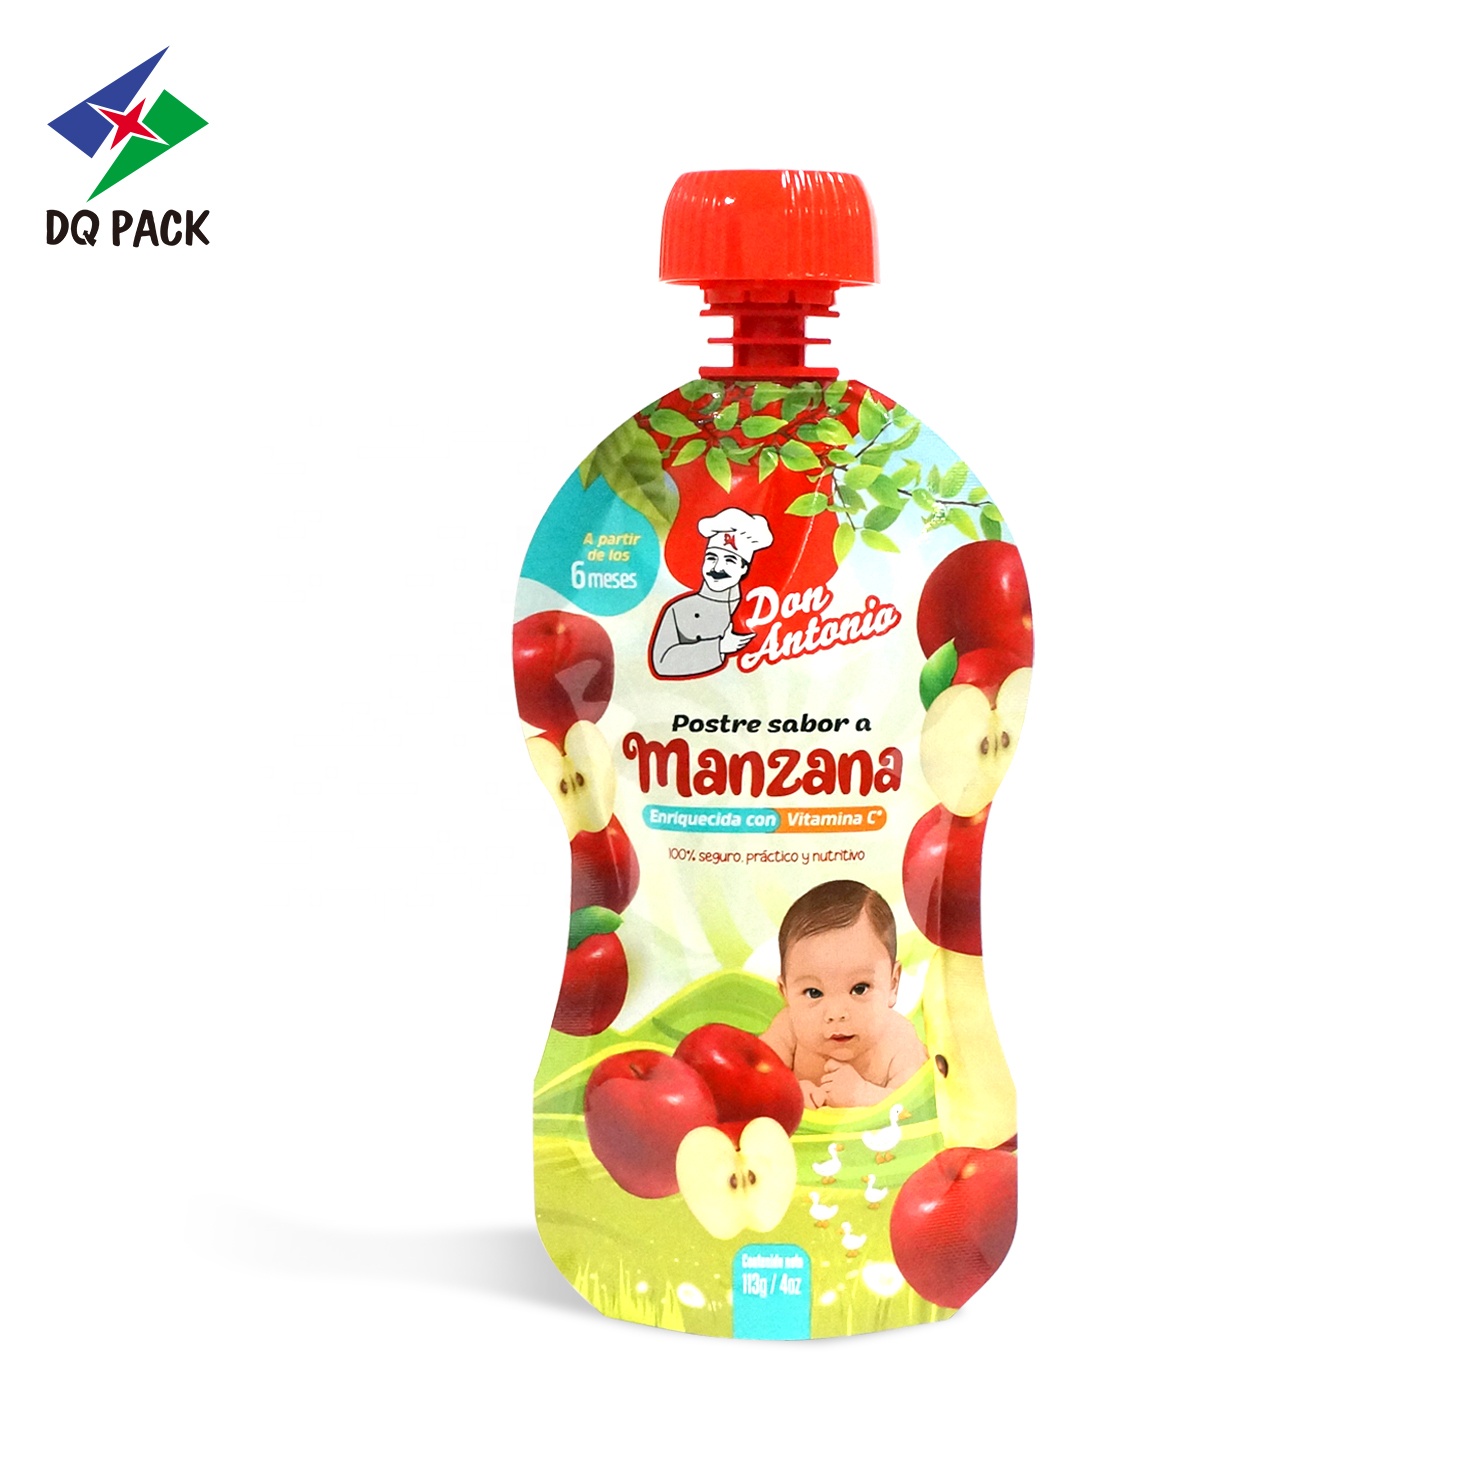 DQ PACK Custom Printed 90g/100g/113g Baby Food Pouch With Spout Beverage Yogurt Baby Food Puree Pouch